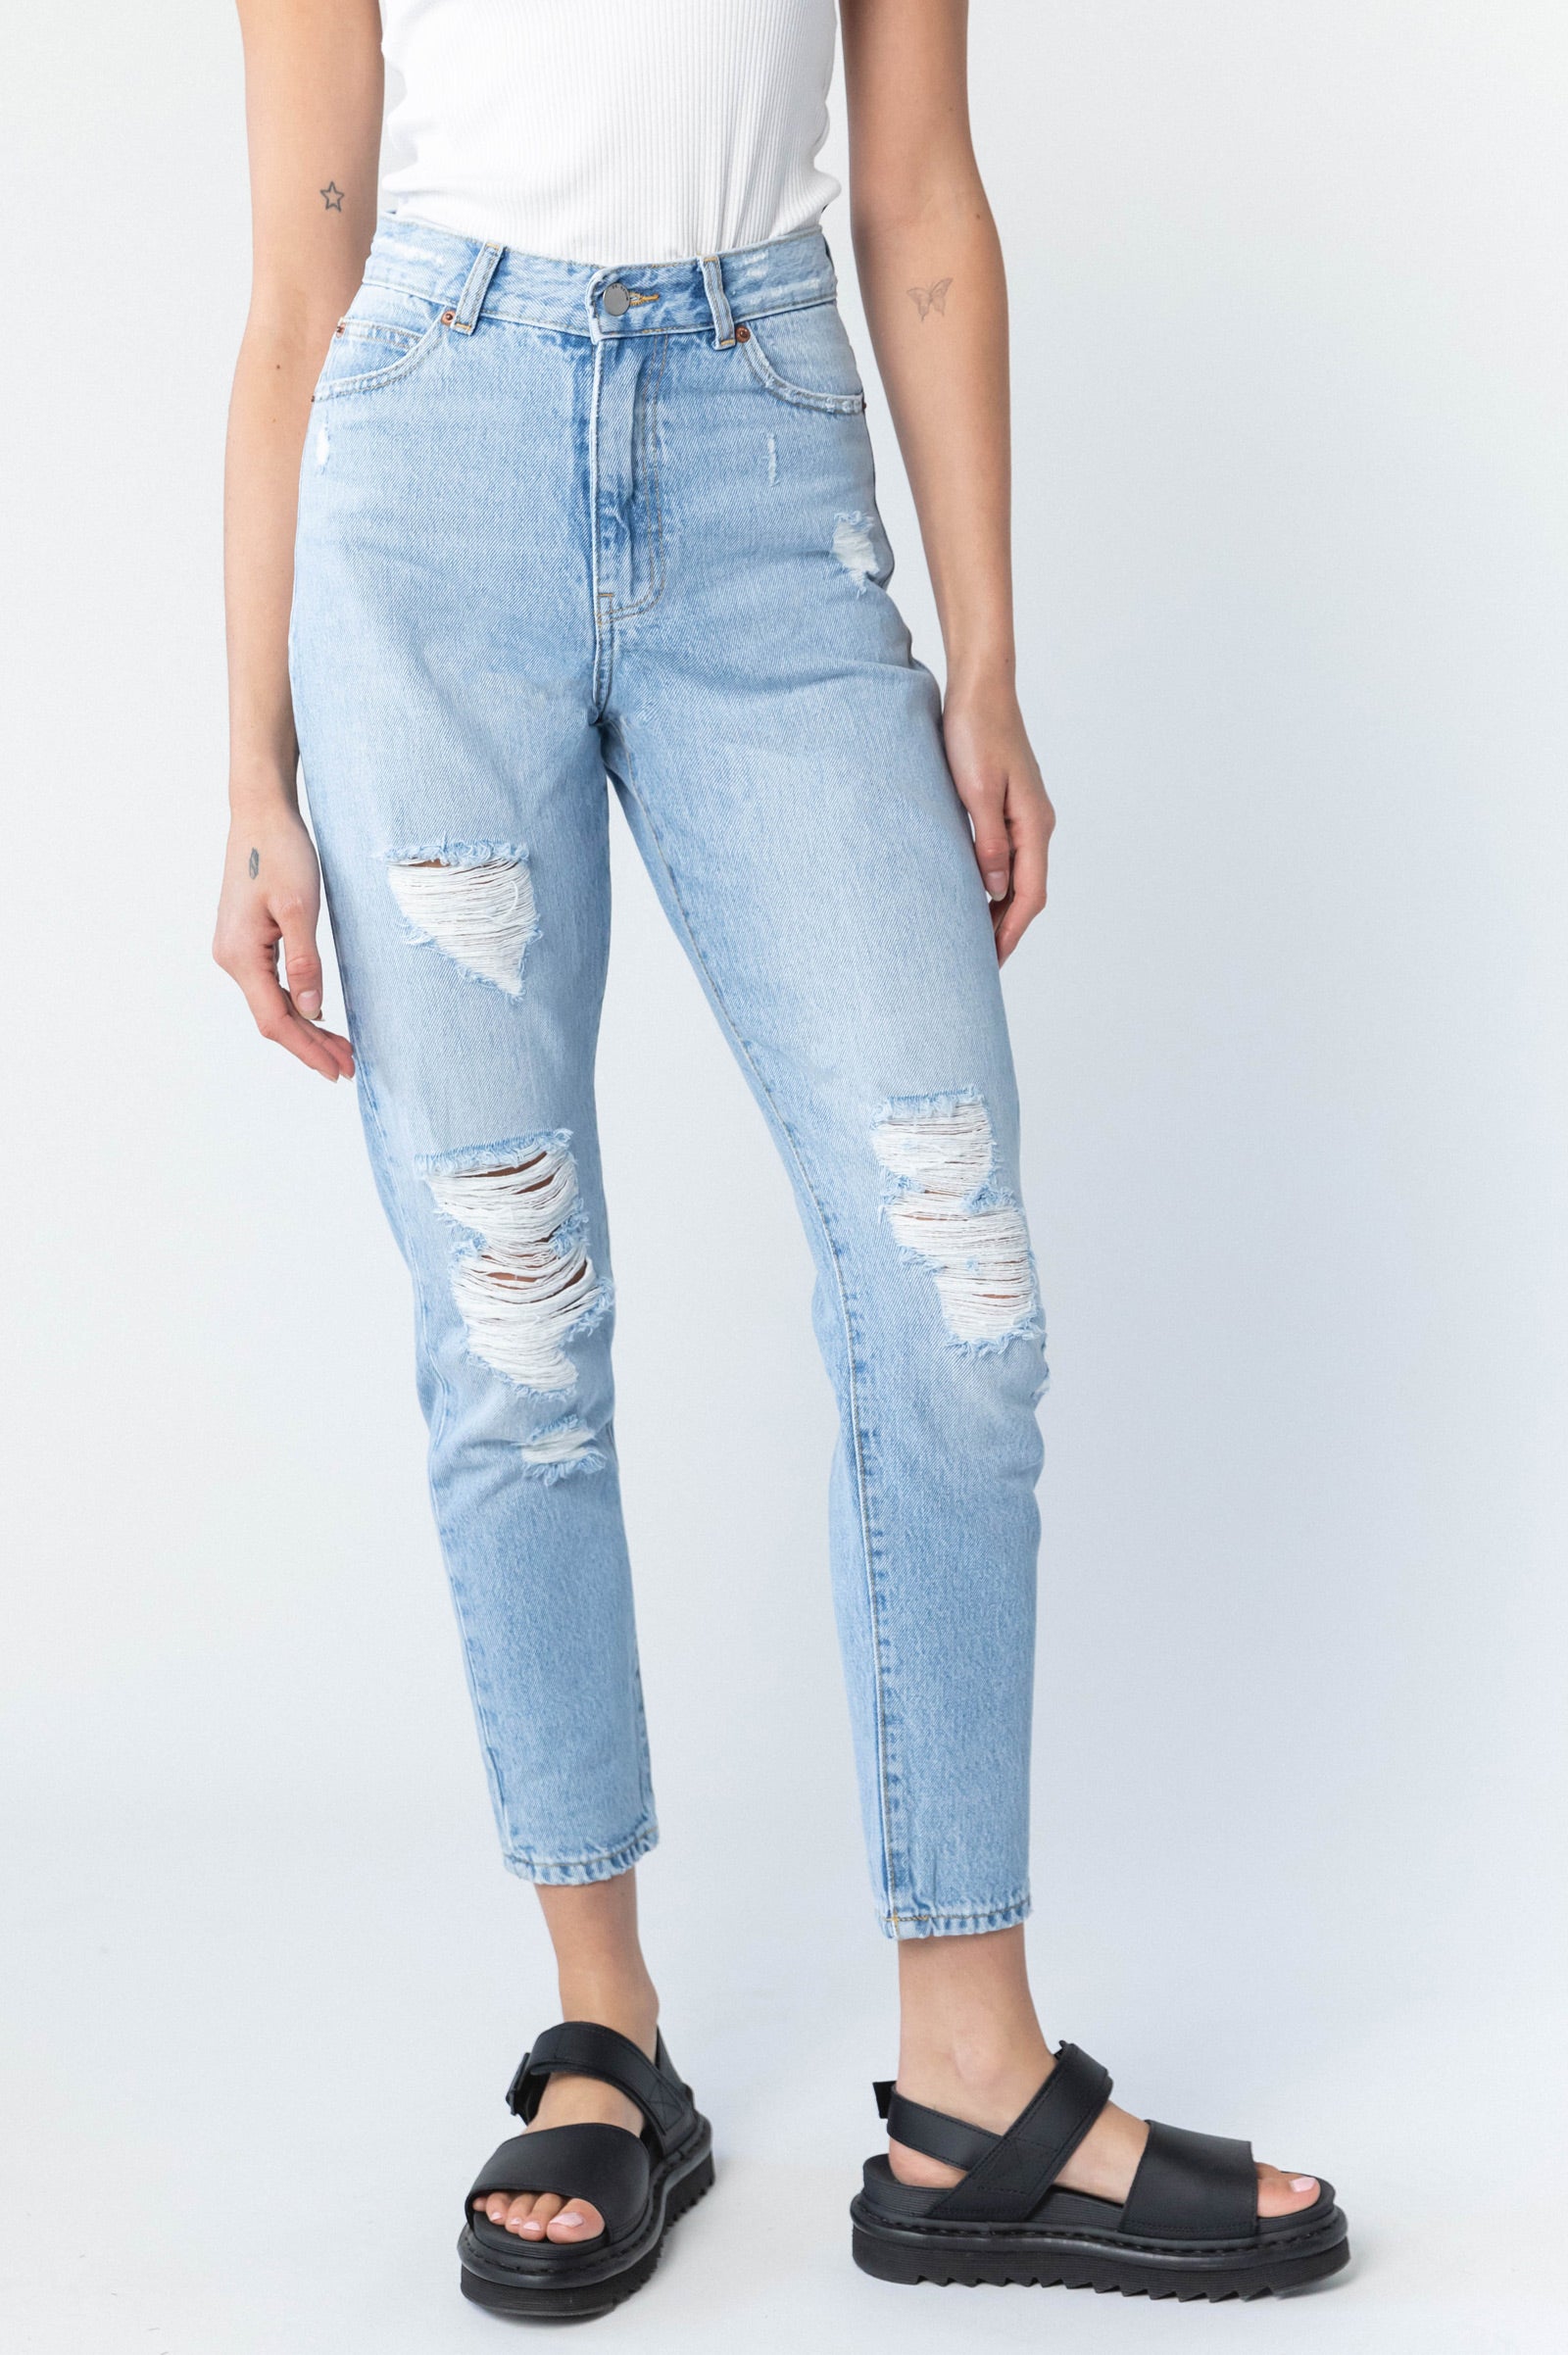 Nora Jeans by Dr Denim – Girl on the Wing